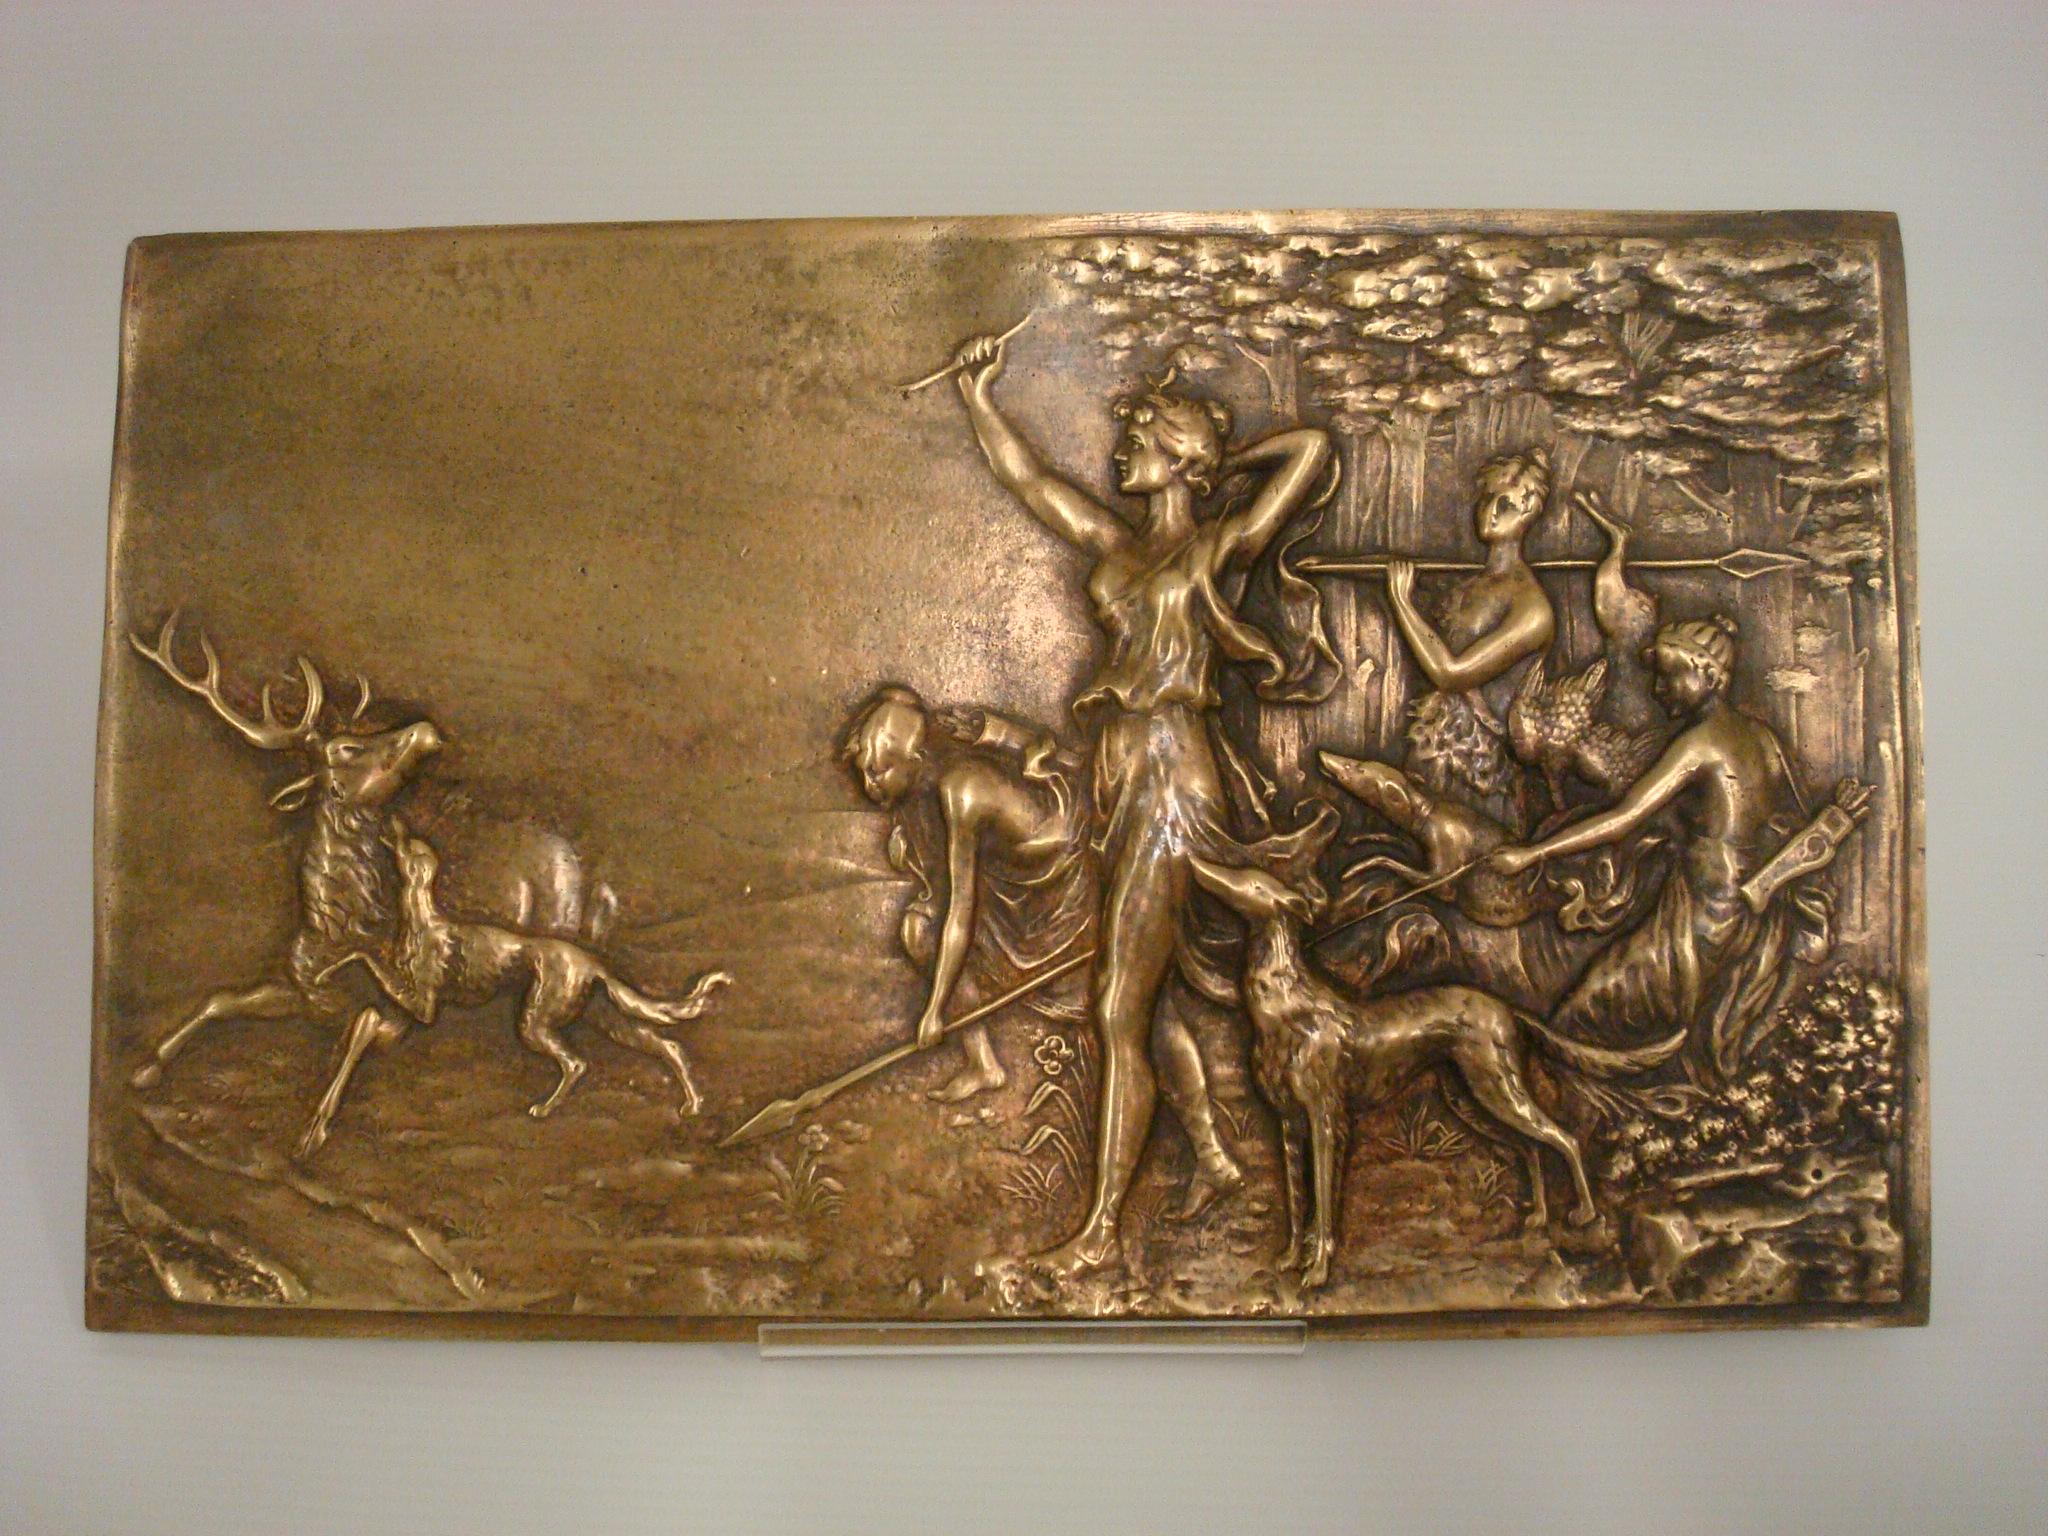 19th century diana the huntress bronze bas relief wall plaque. Diana with raised bow and hunting dog near her side.